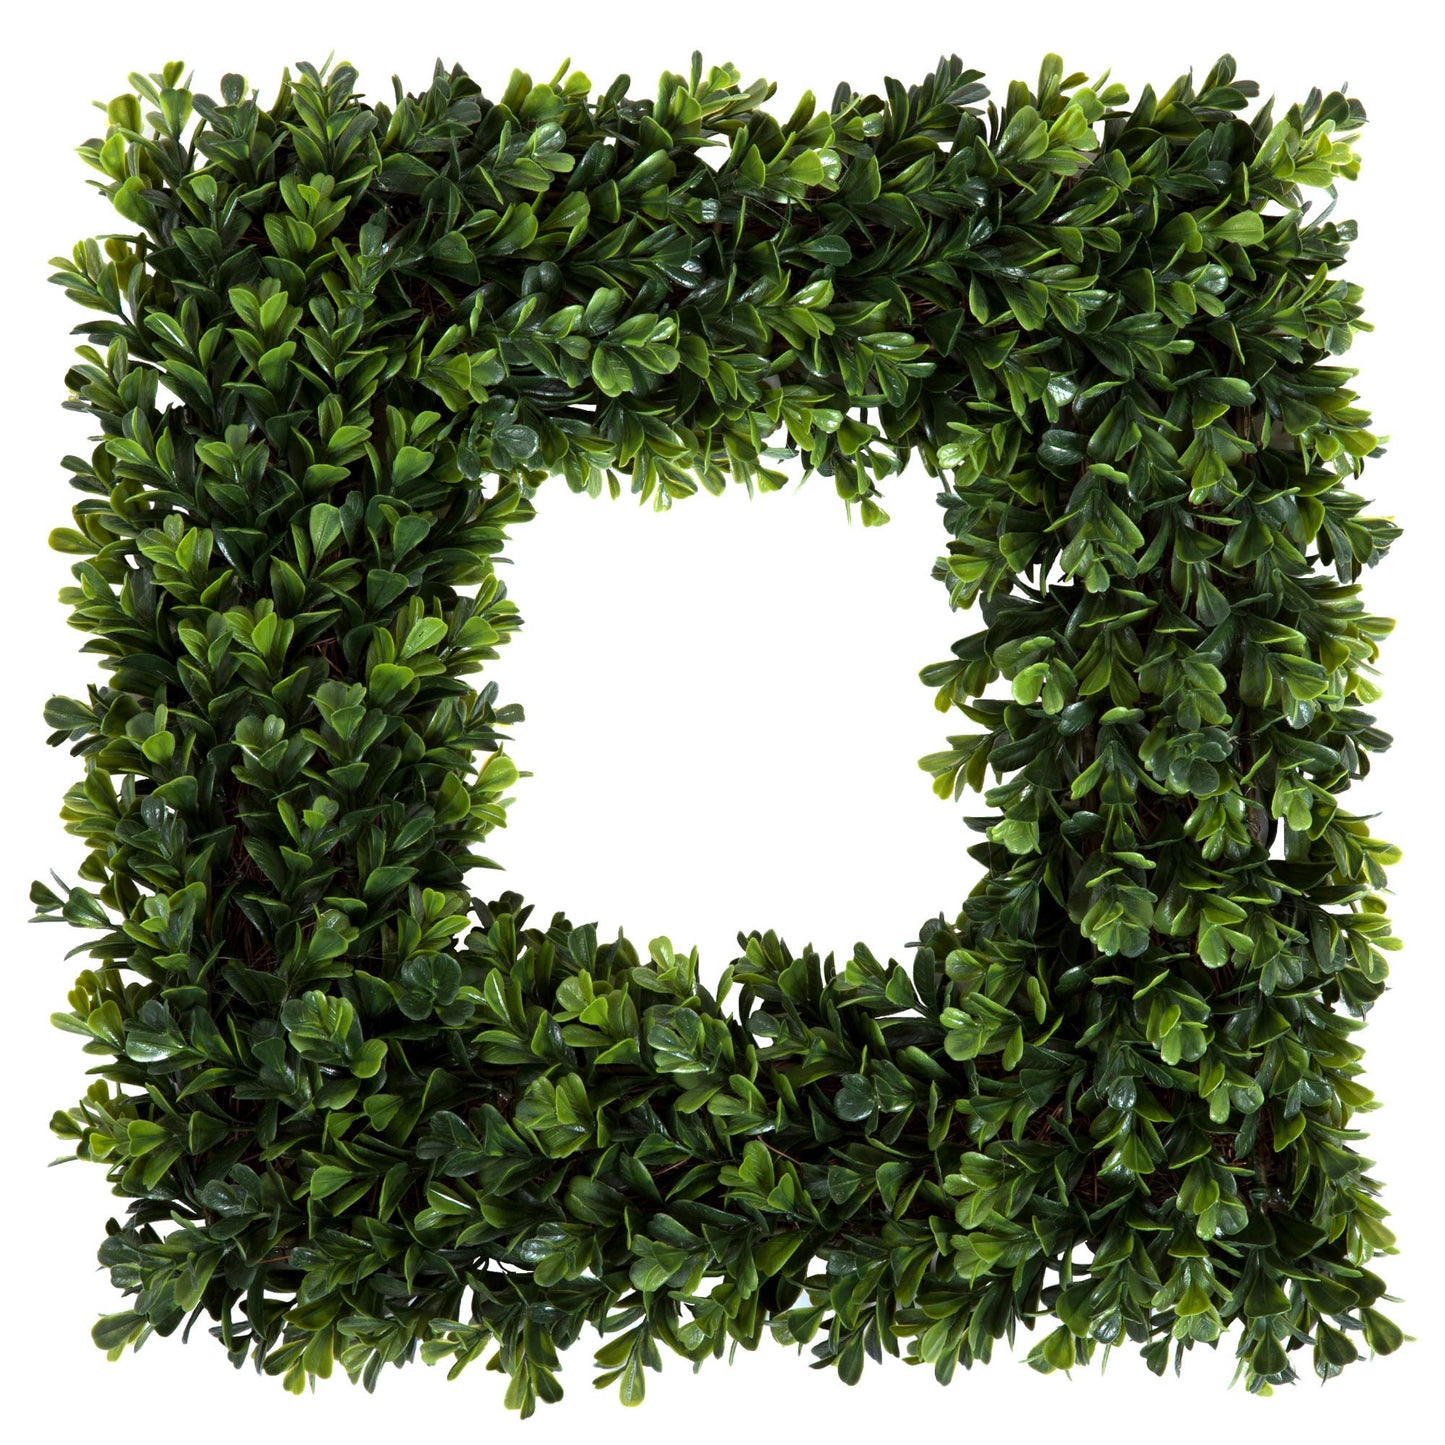 Pure Garden Boxwood, Artificial Wreath For The Front Door, Home Décor, Uv Resistant – 16.5 Inches, Square, 16.5X3, Green